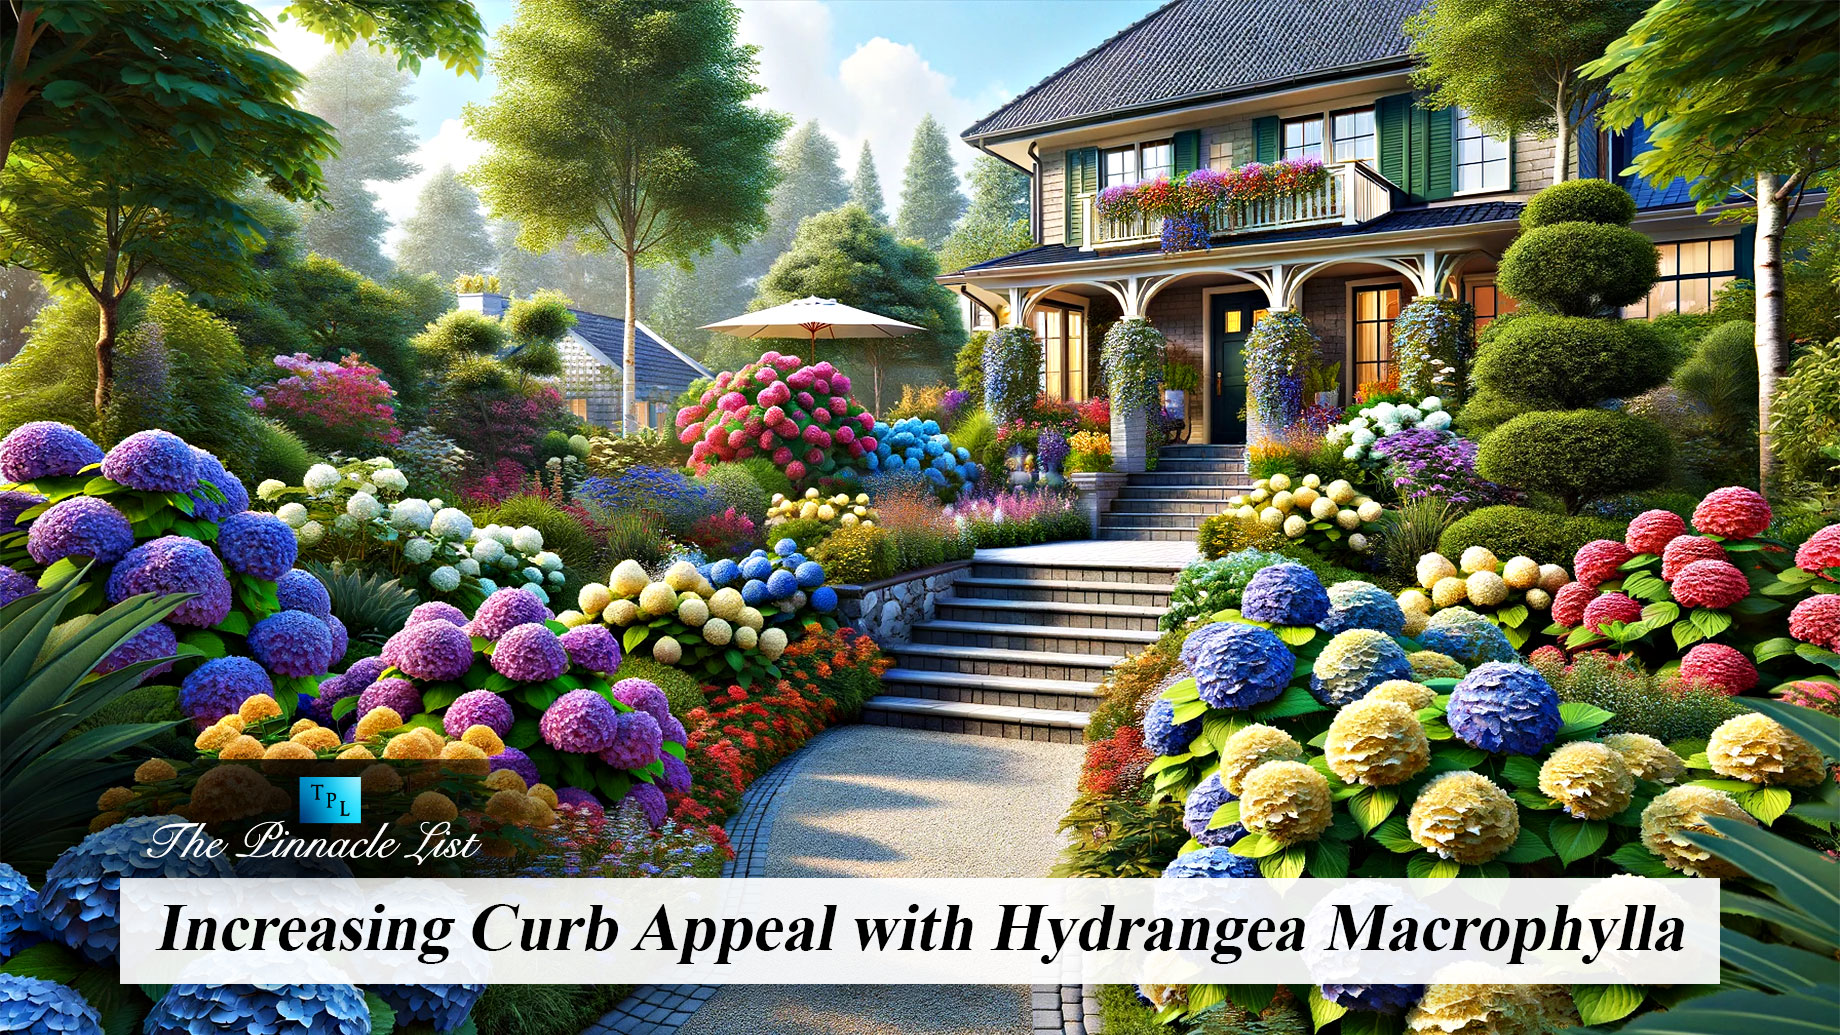 Increasing Curb Appeal with Hydrangea Macrophylla